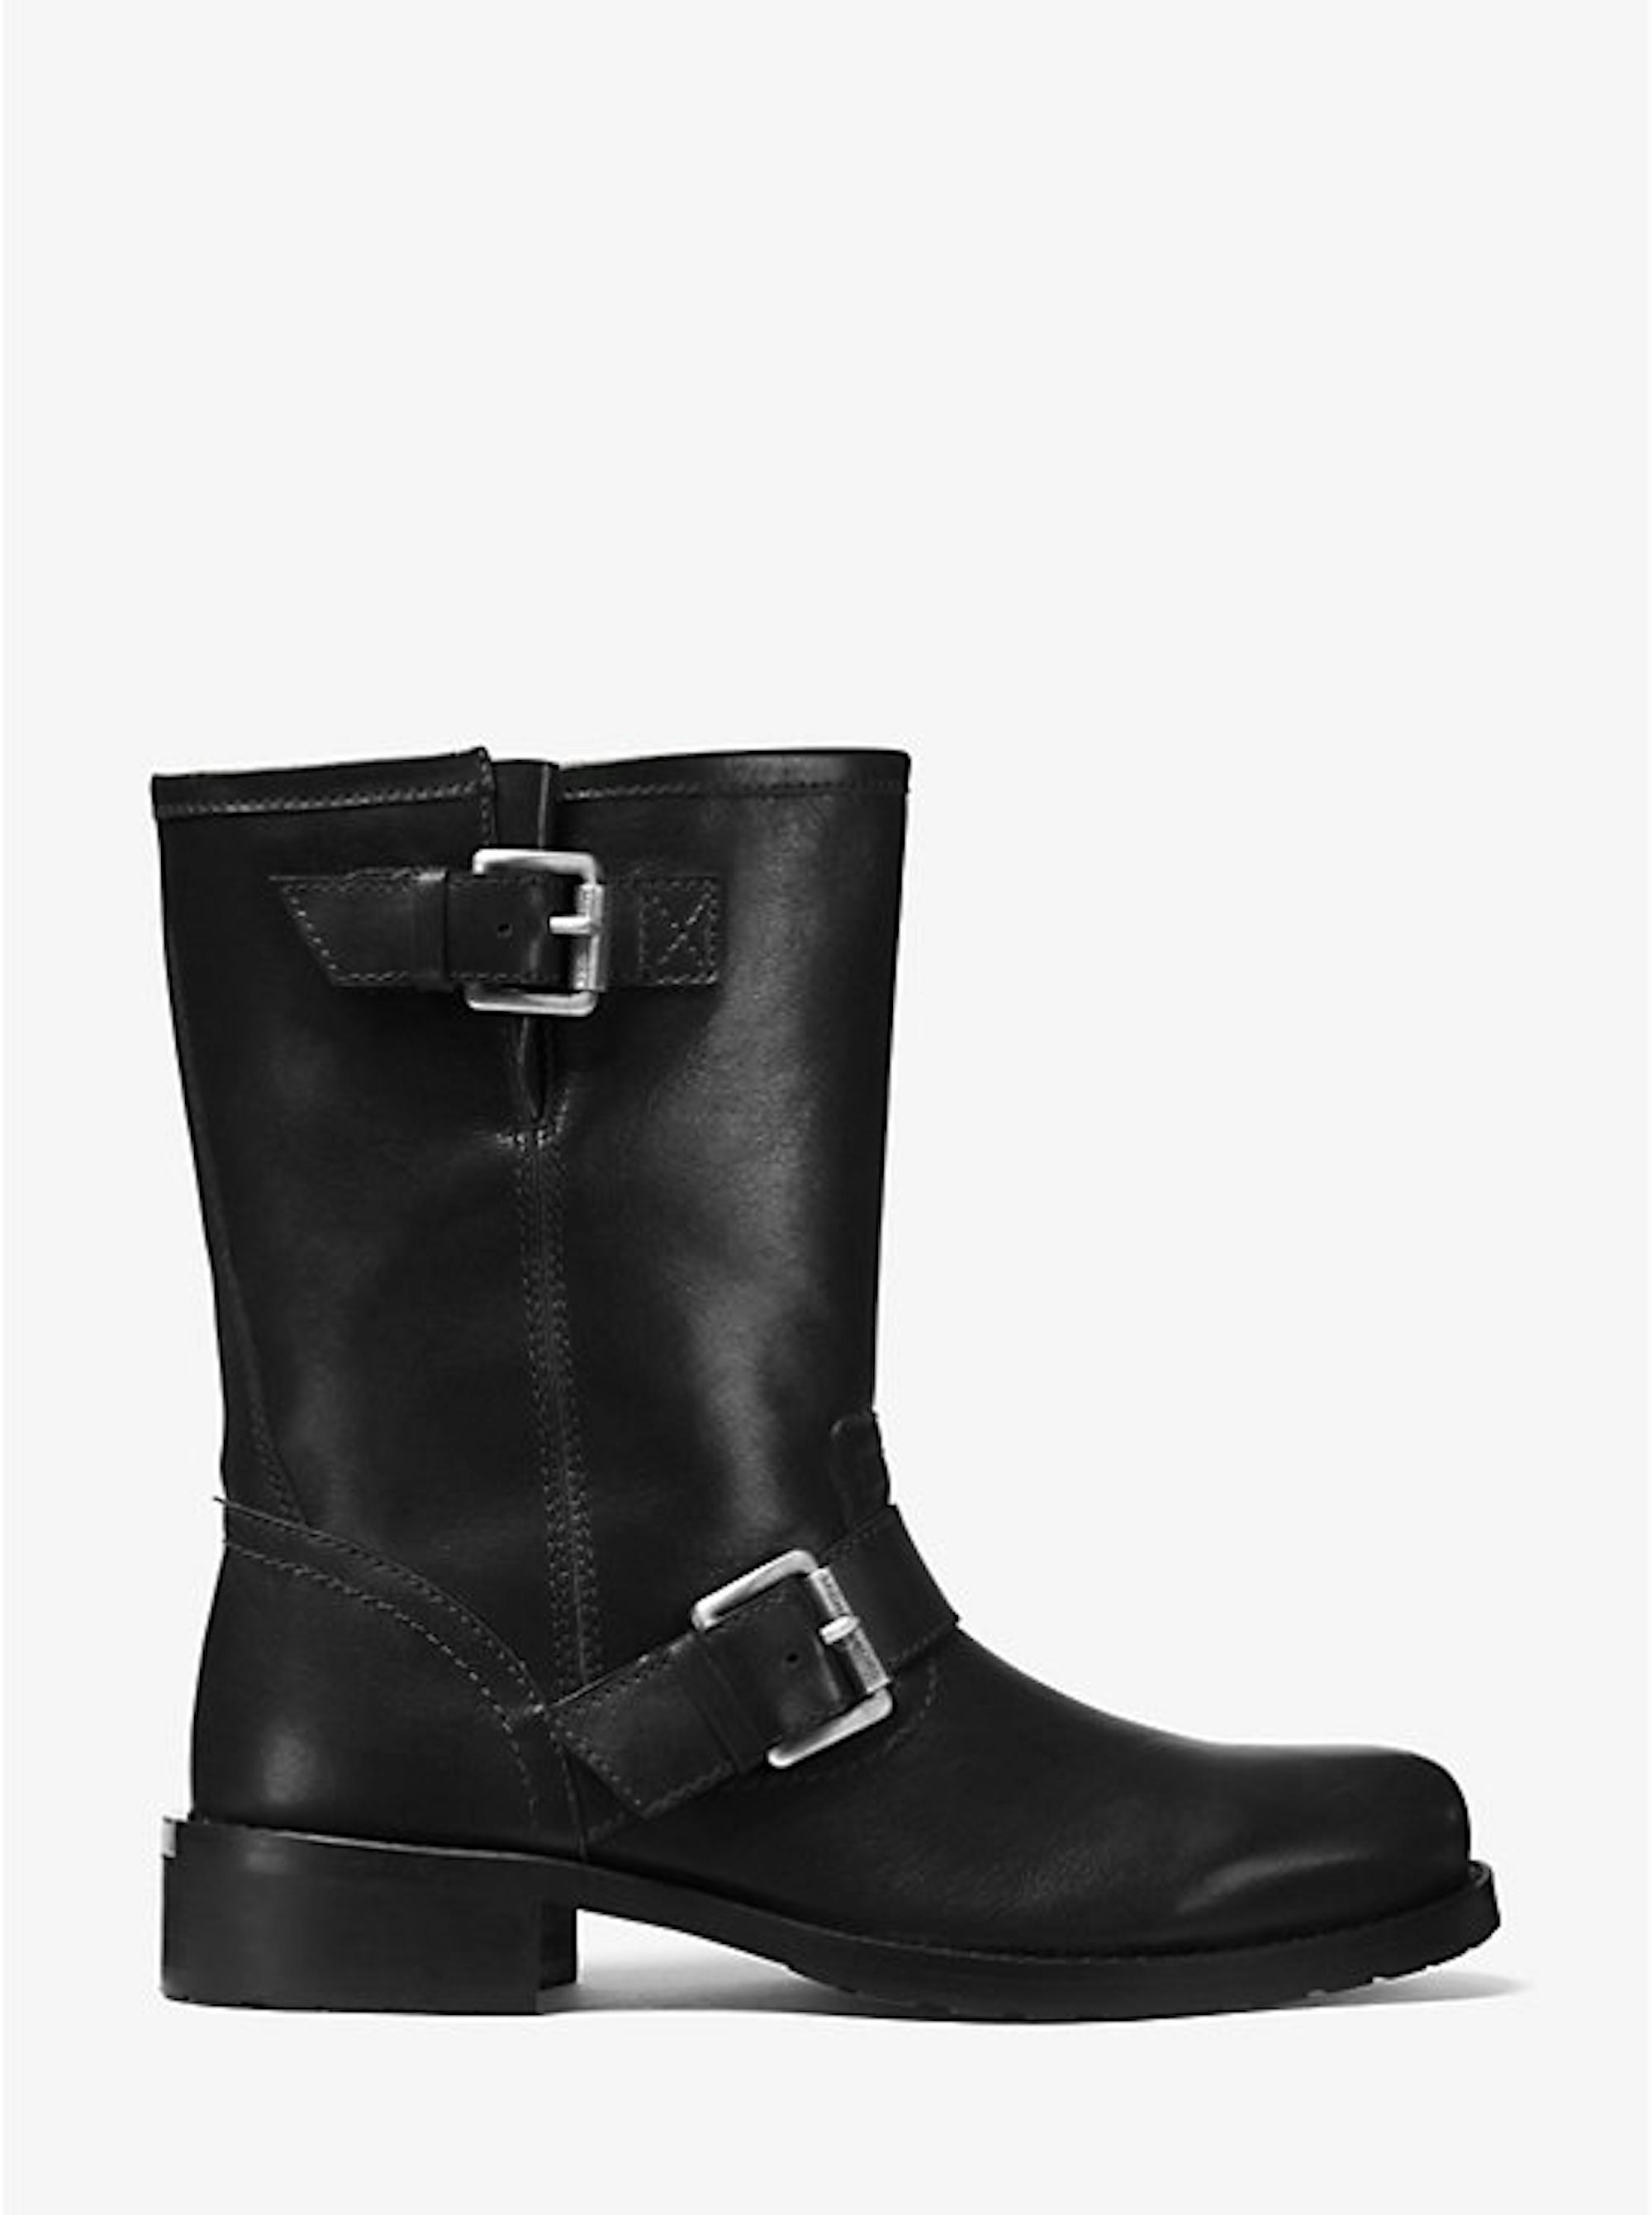 13 Moto Boots to Help You Go Grunge This Fall